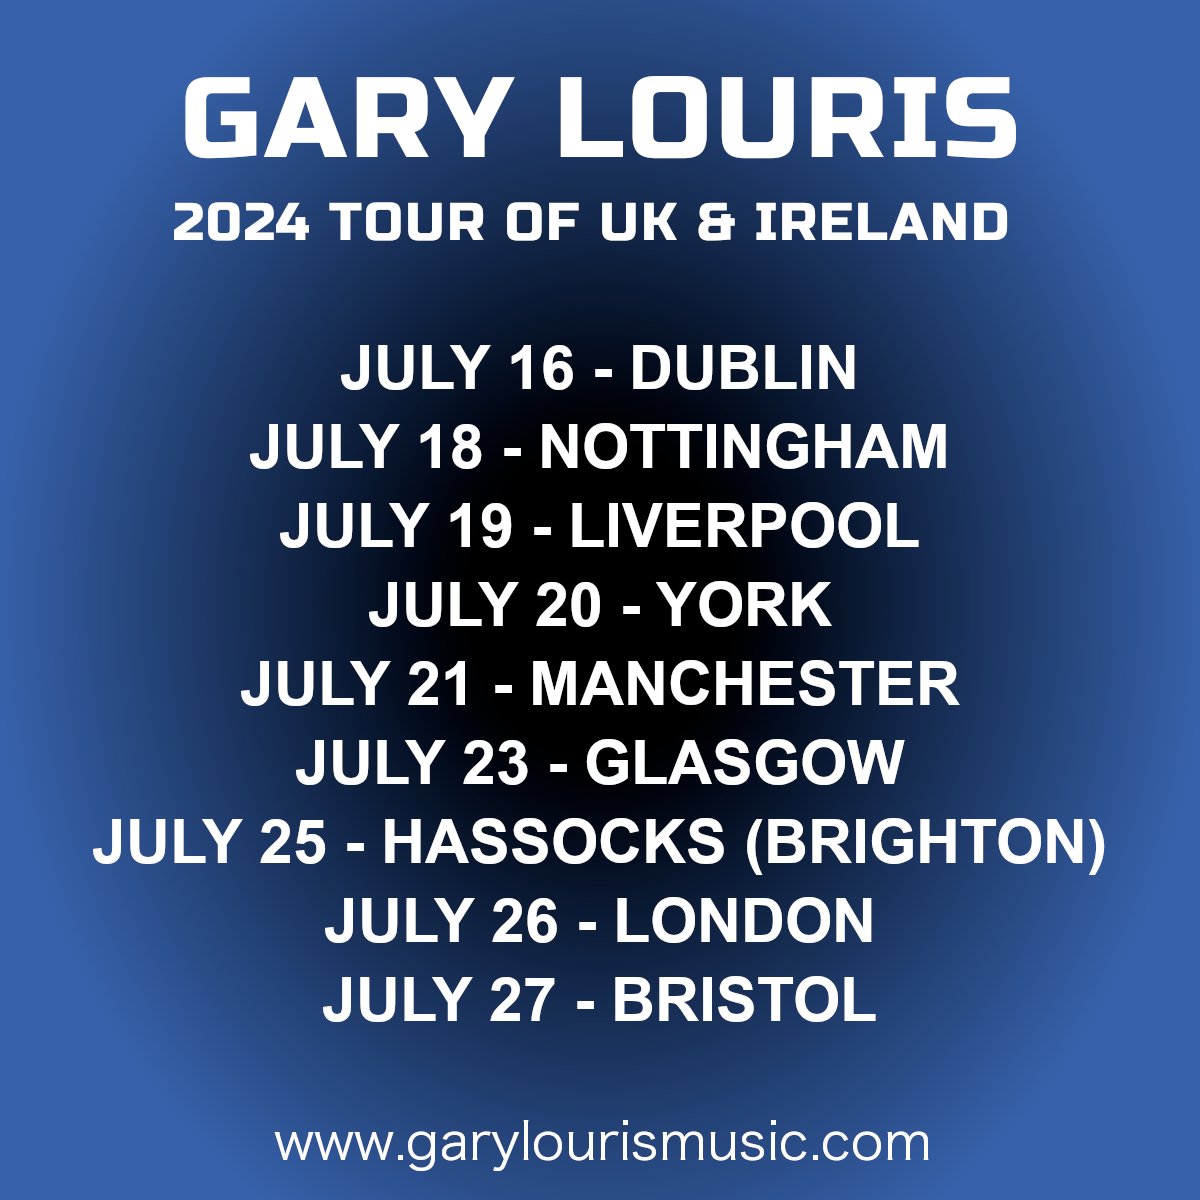 A Liverpool date on 7/19 has been added to the Gary Louris solo tour of the UK & Ireland in July 2024. Schedule with ticket links: bit.ly/GLshows Tickets for all shows go on sale Friday, 4/26 at 10AM local time (9AM for Bristol).